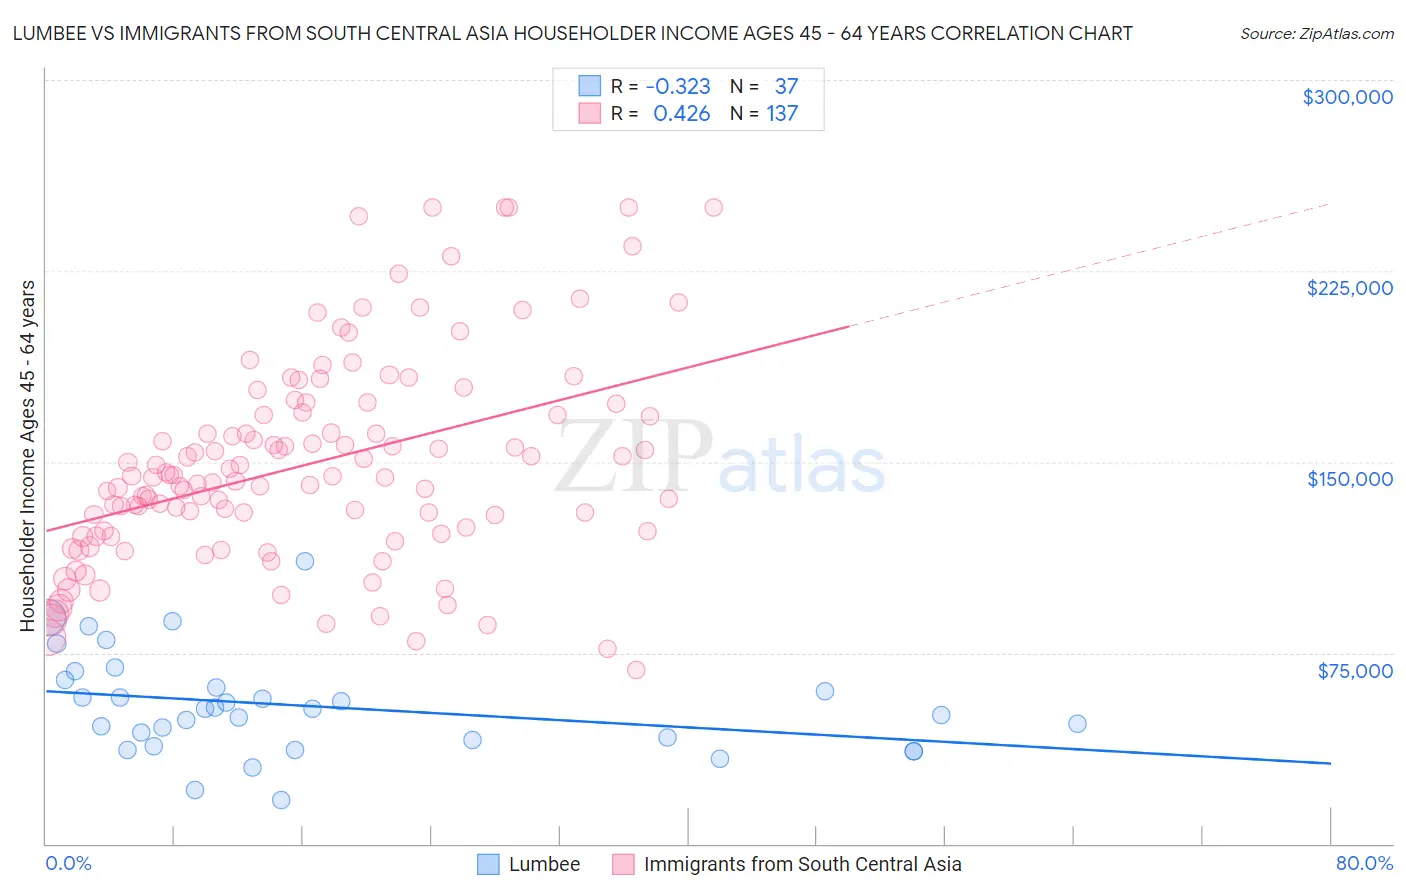 Lumbee vs Immigrants from South Central Asia Householder Income Ages 45 - 64 years